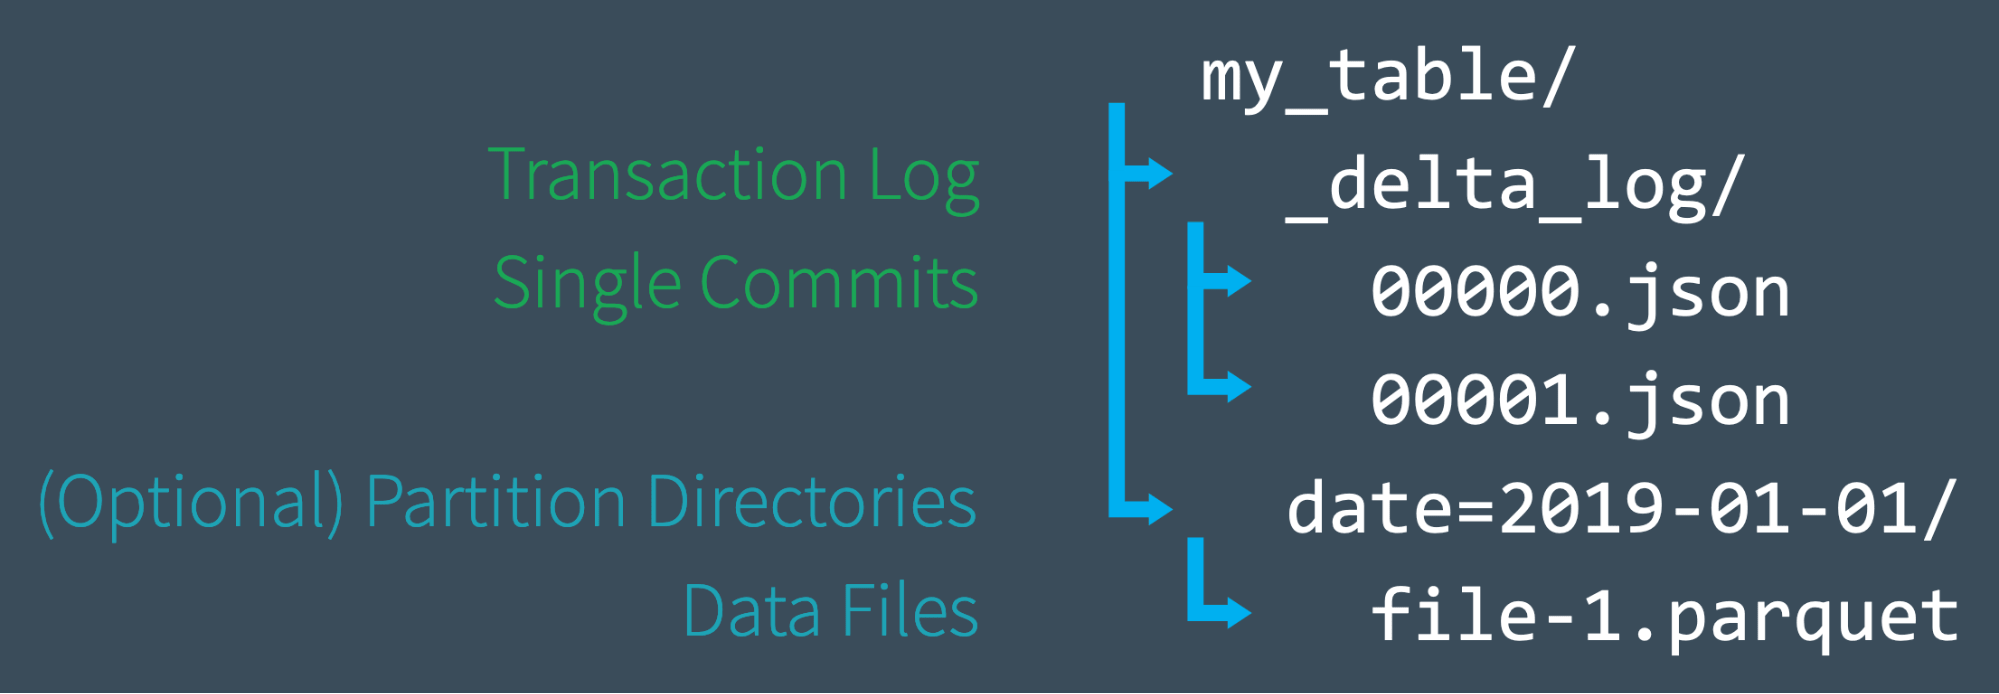 Diagram of the Delta Lake Transaction Log file structure.